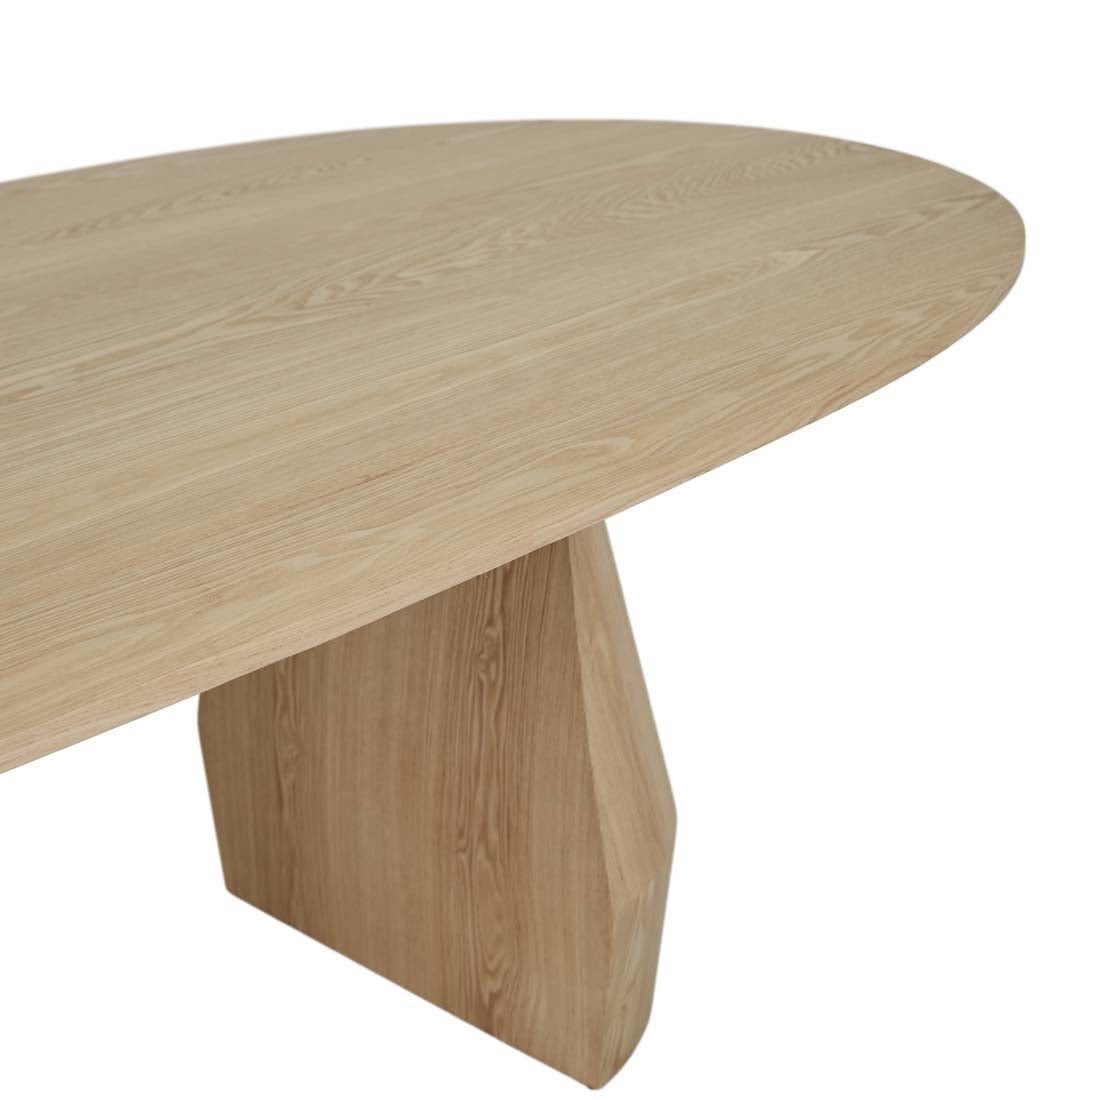 Bloom Oval Dining Table - Natural Ash